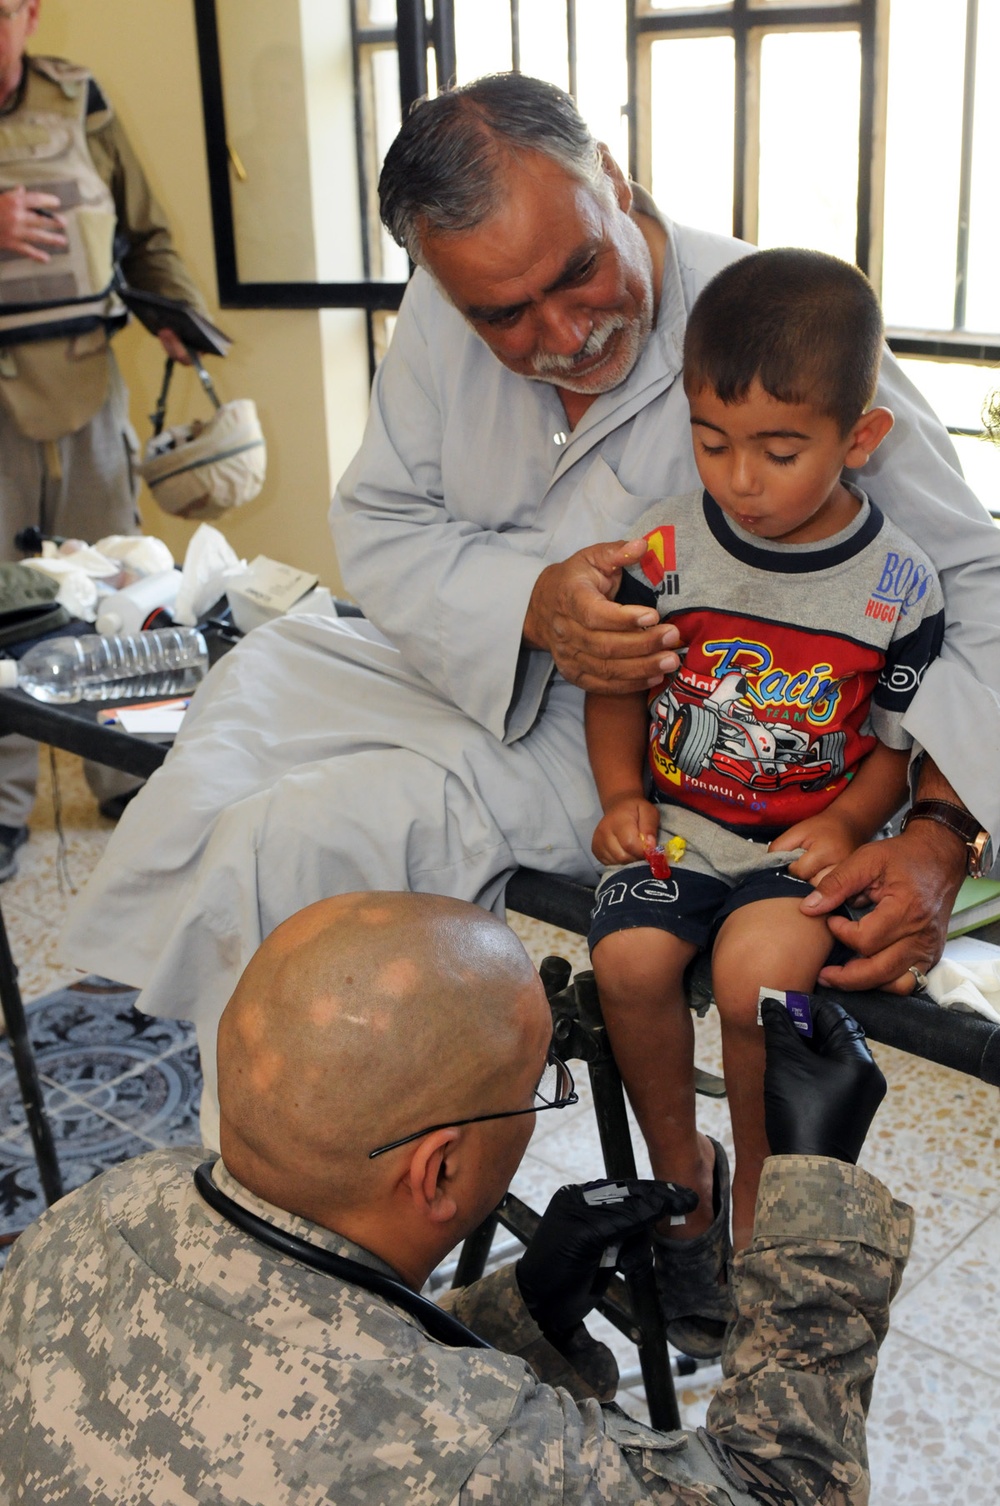 US Soldiers visit Iraqi clinic, provide medical care to locals